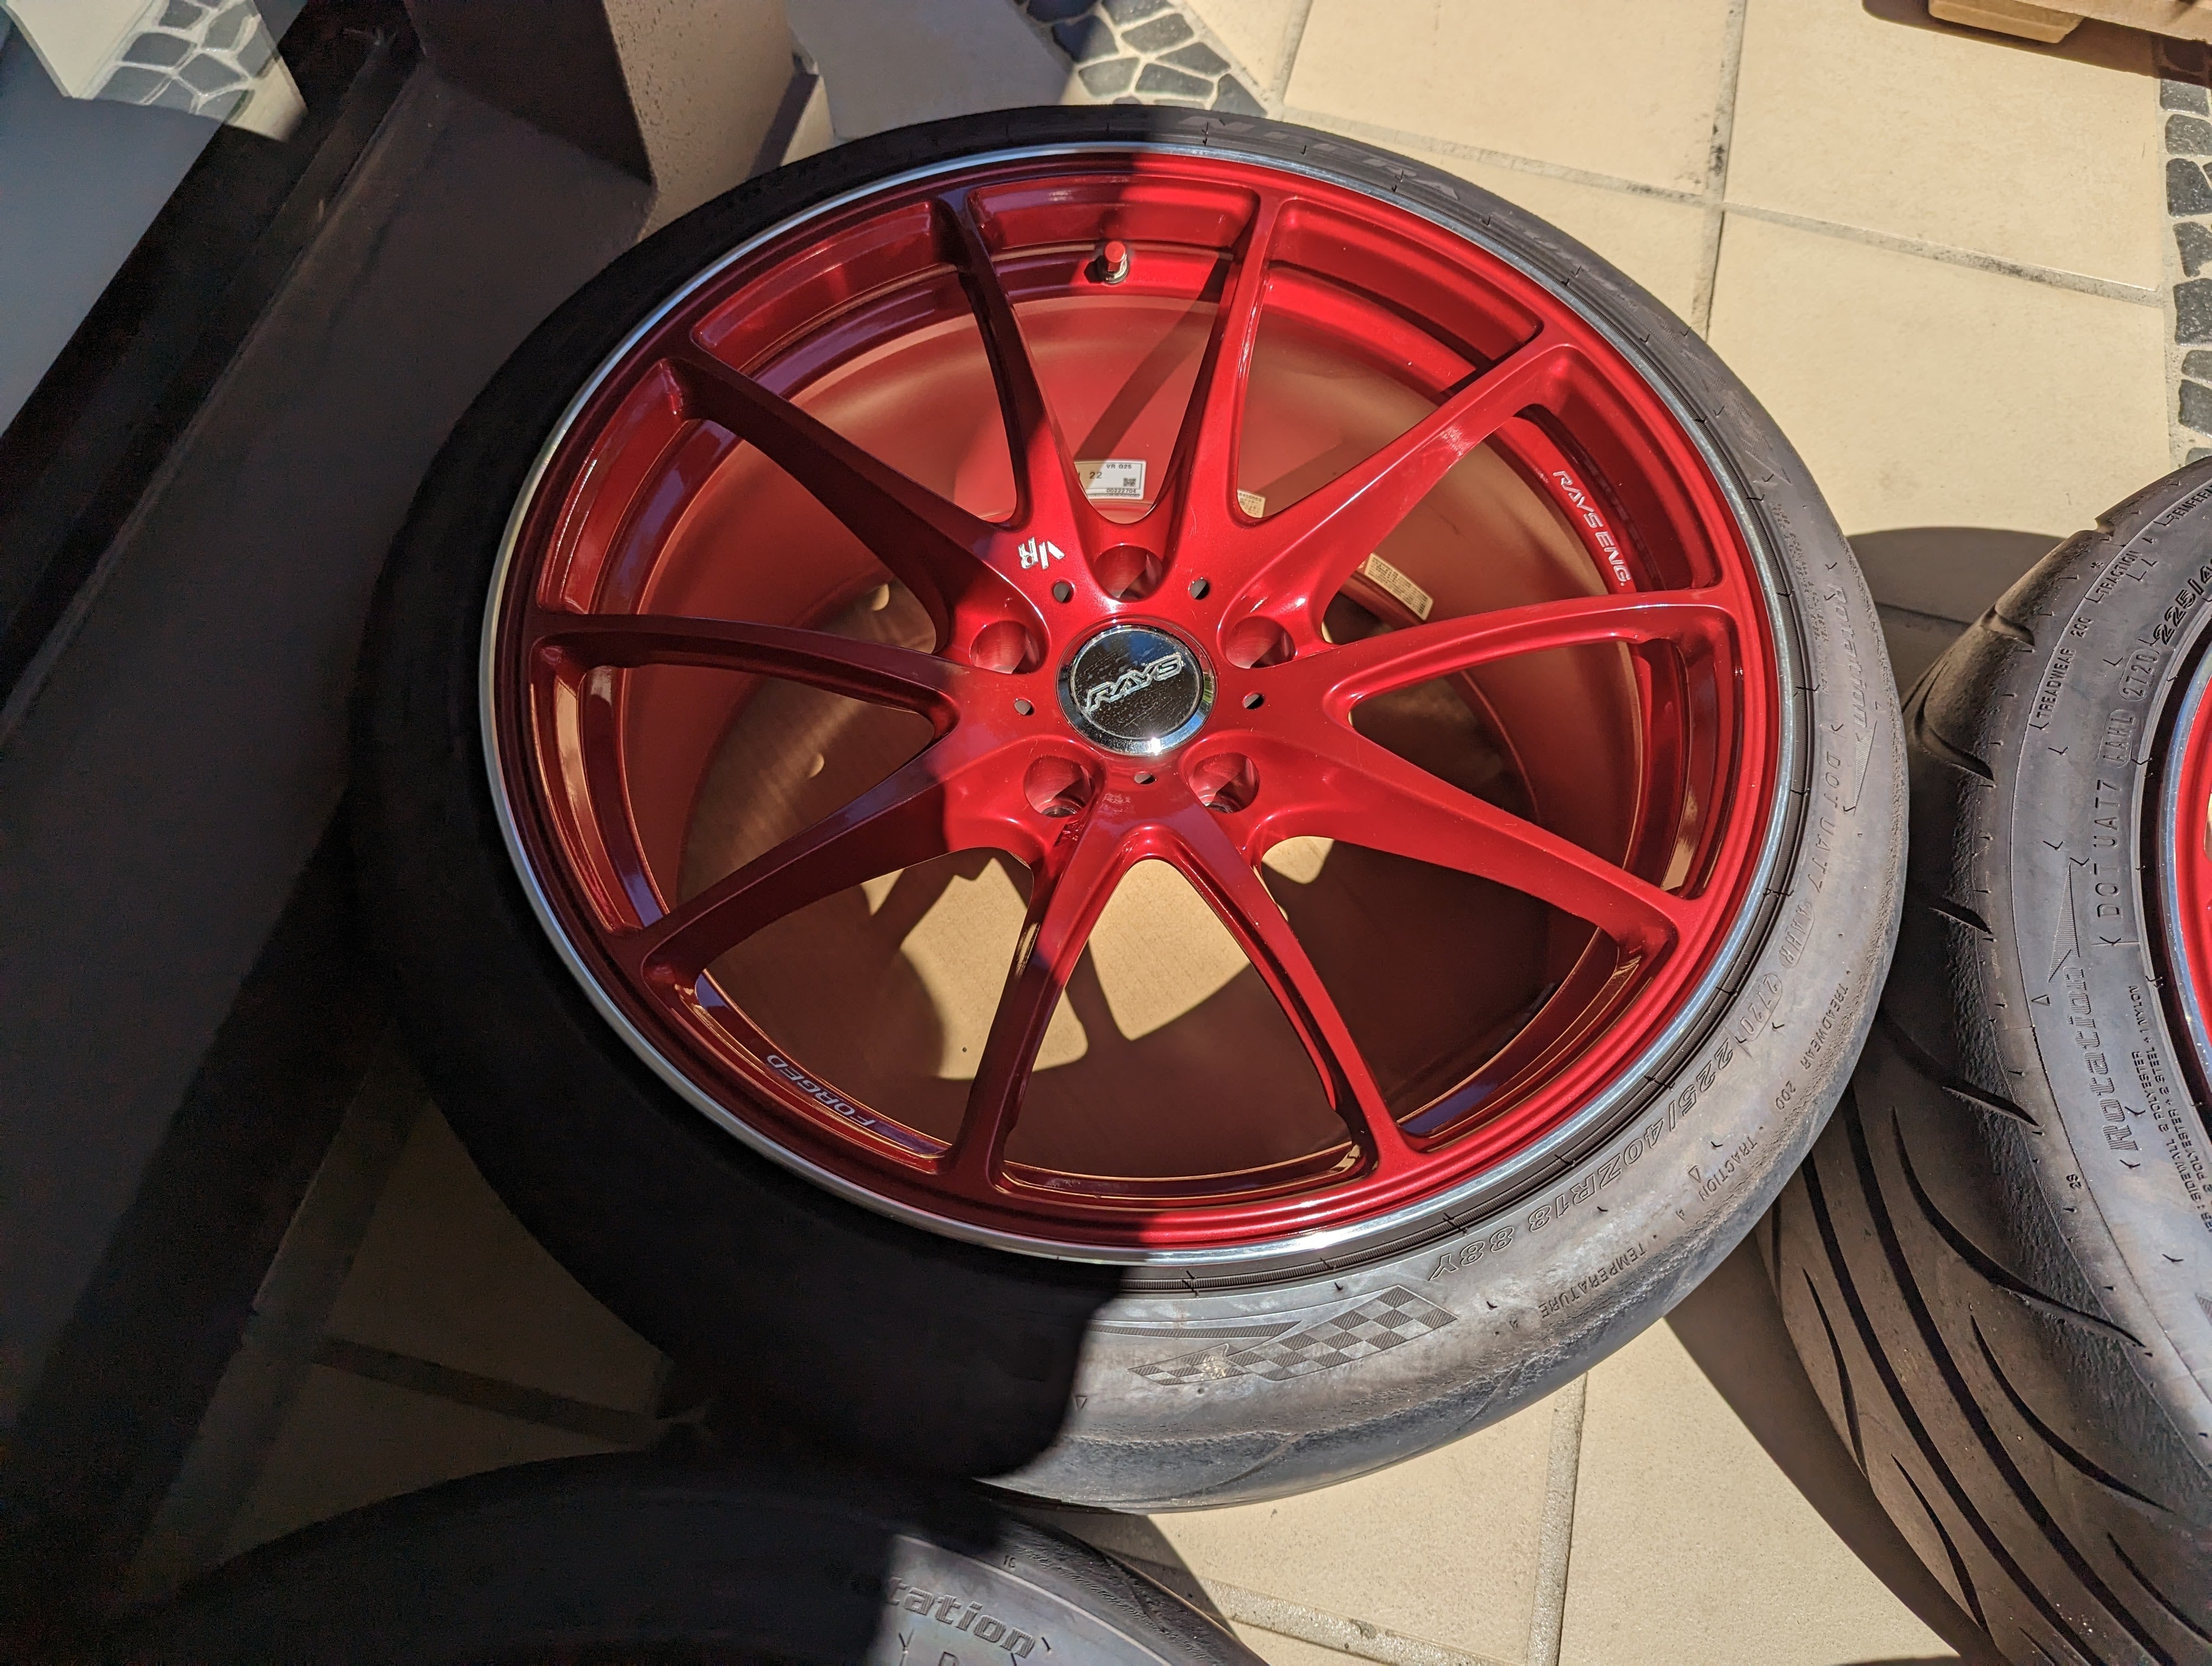 Rays Volk Racing G25 (Hyper Red) with Genuine Volk Racing Center Caps and Tyres - 5x114.3 - 18x9.5 +22